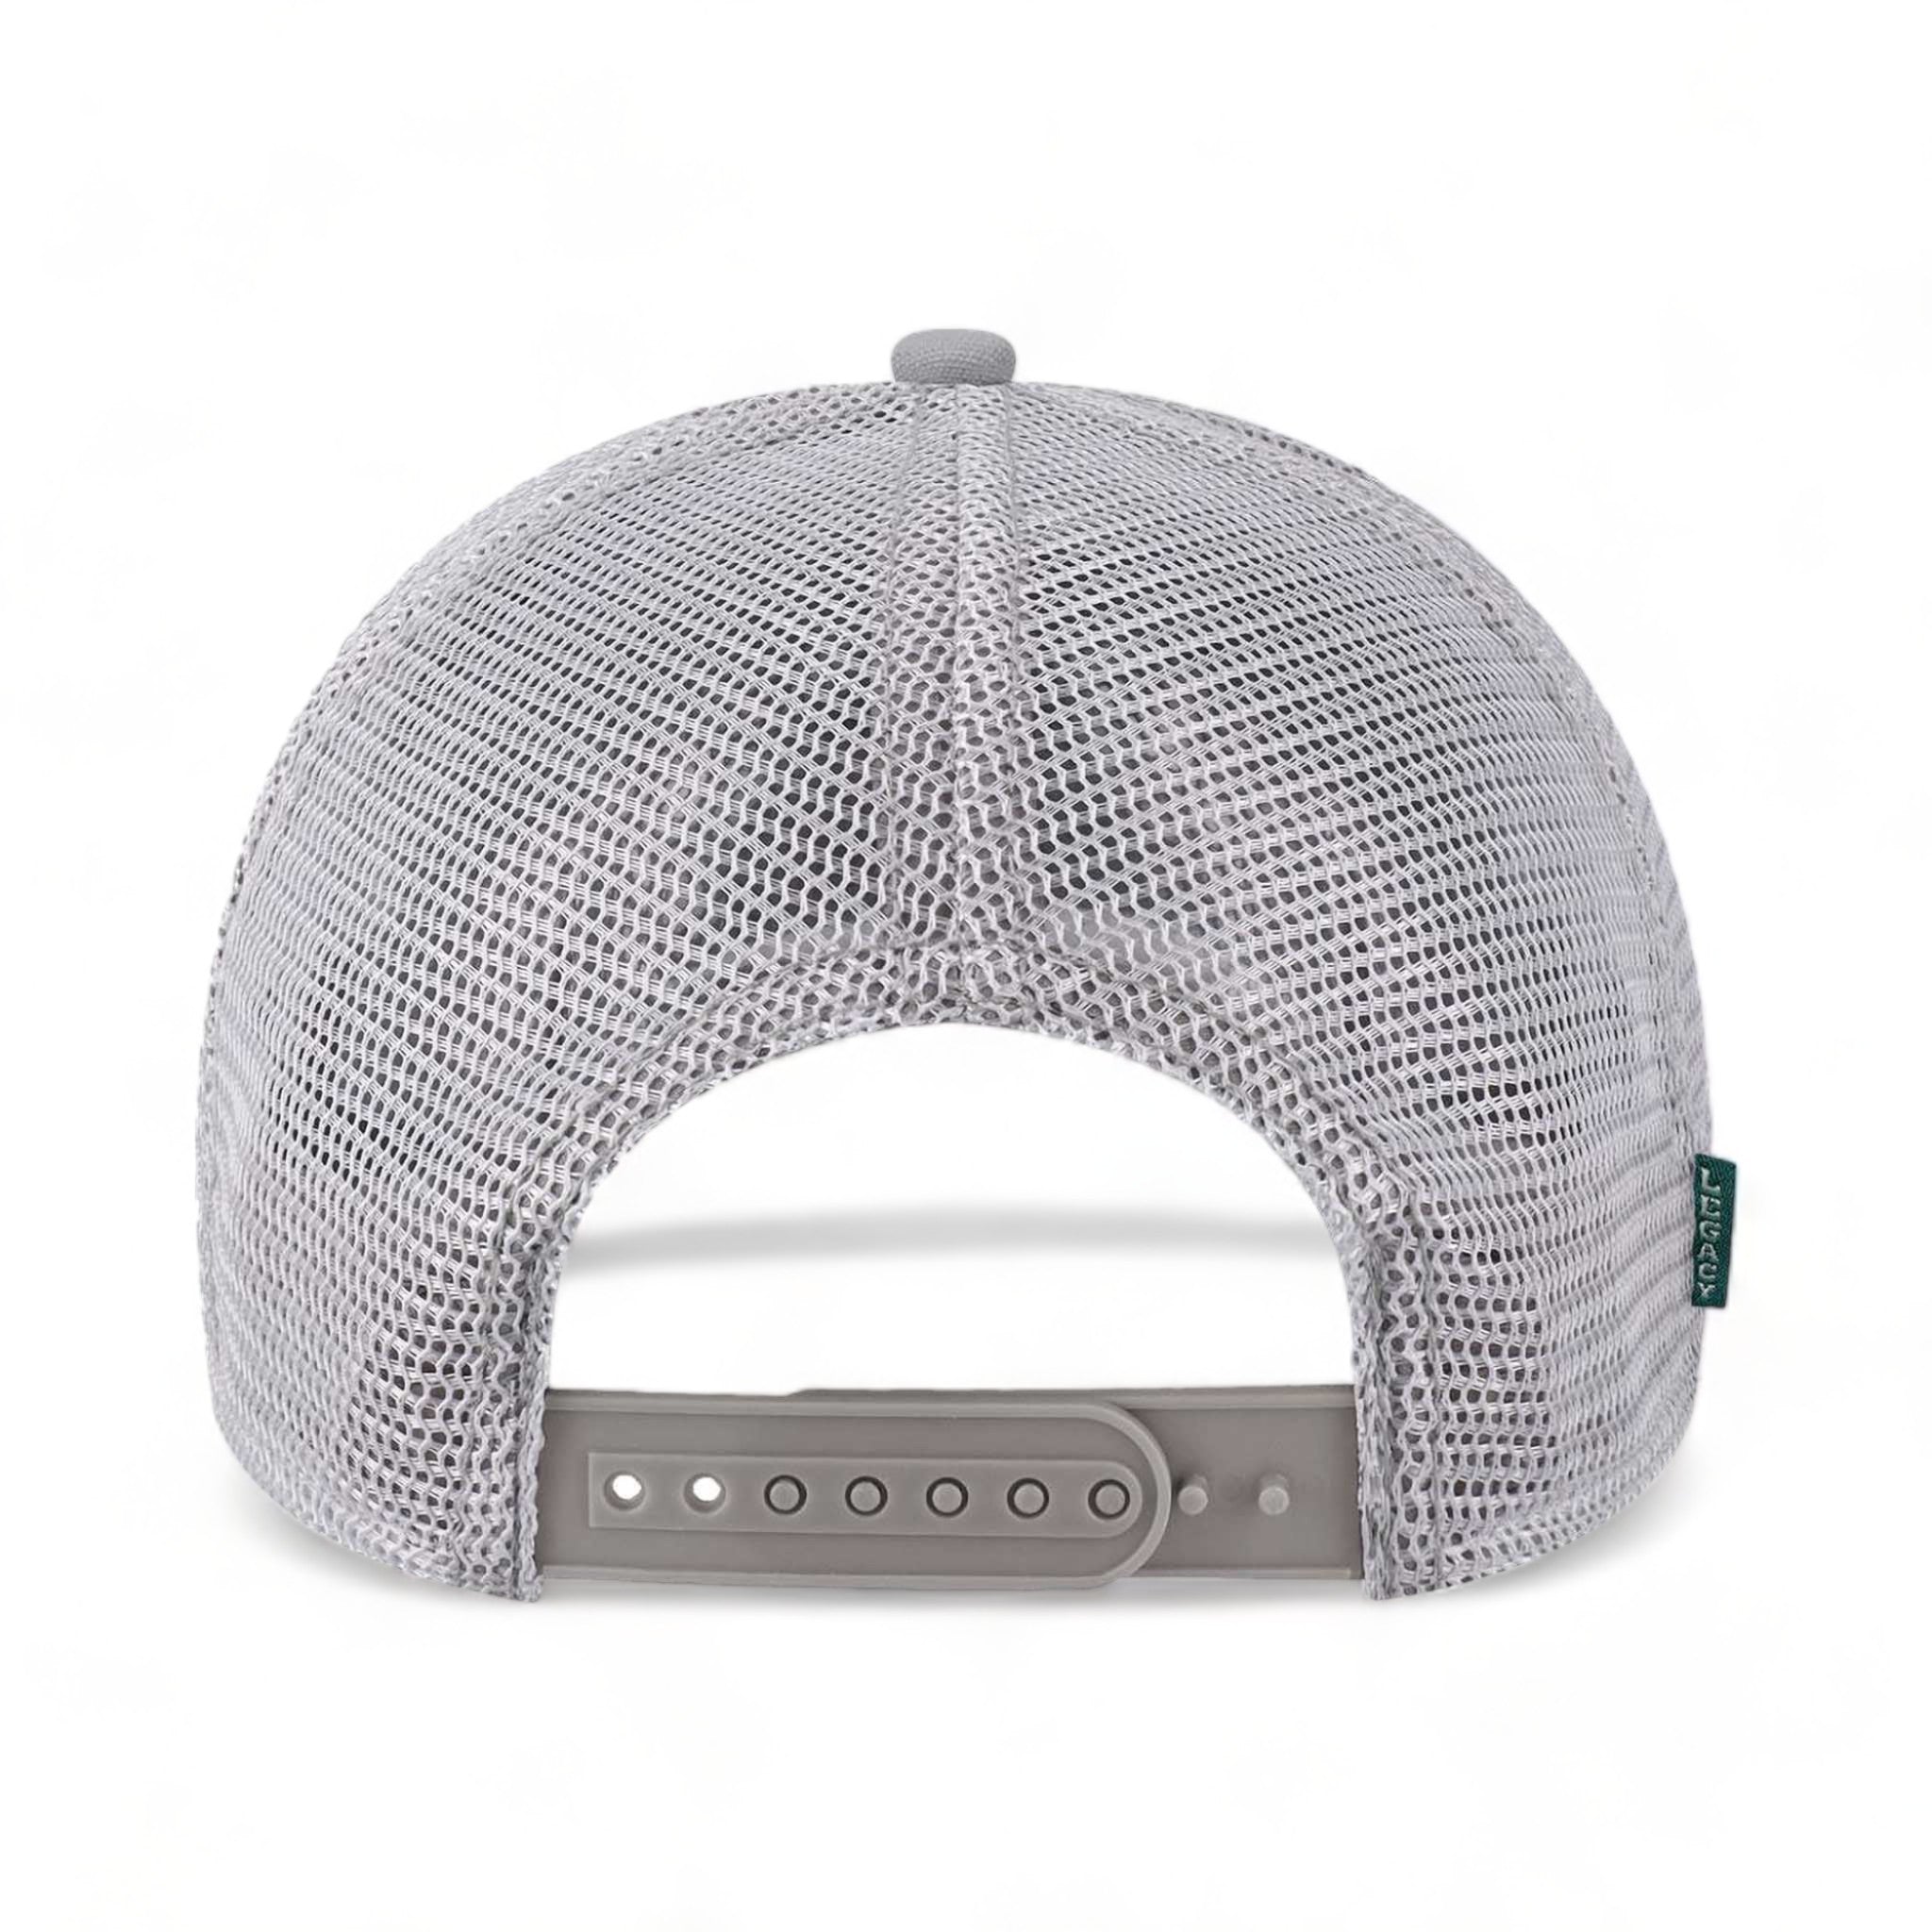 Back view of LEGACY MPS custom hat in light grey, seafoam and silver